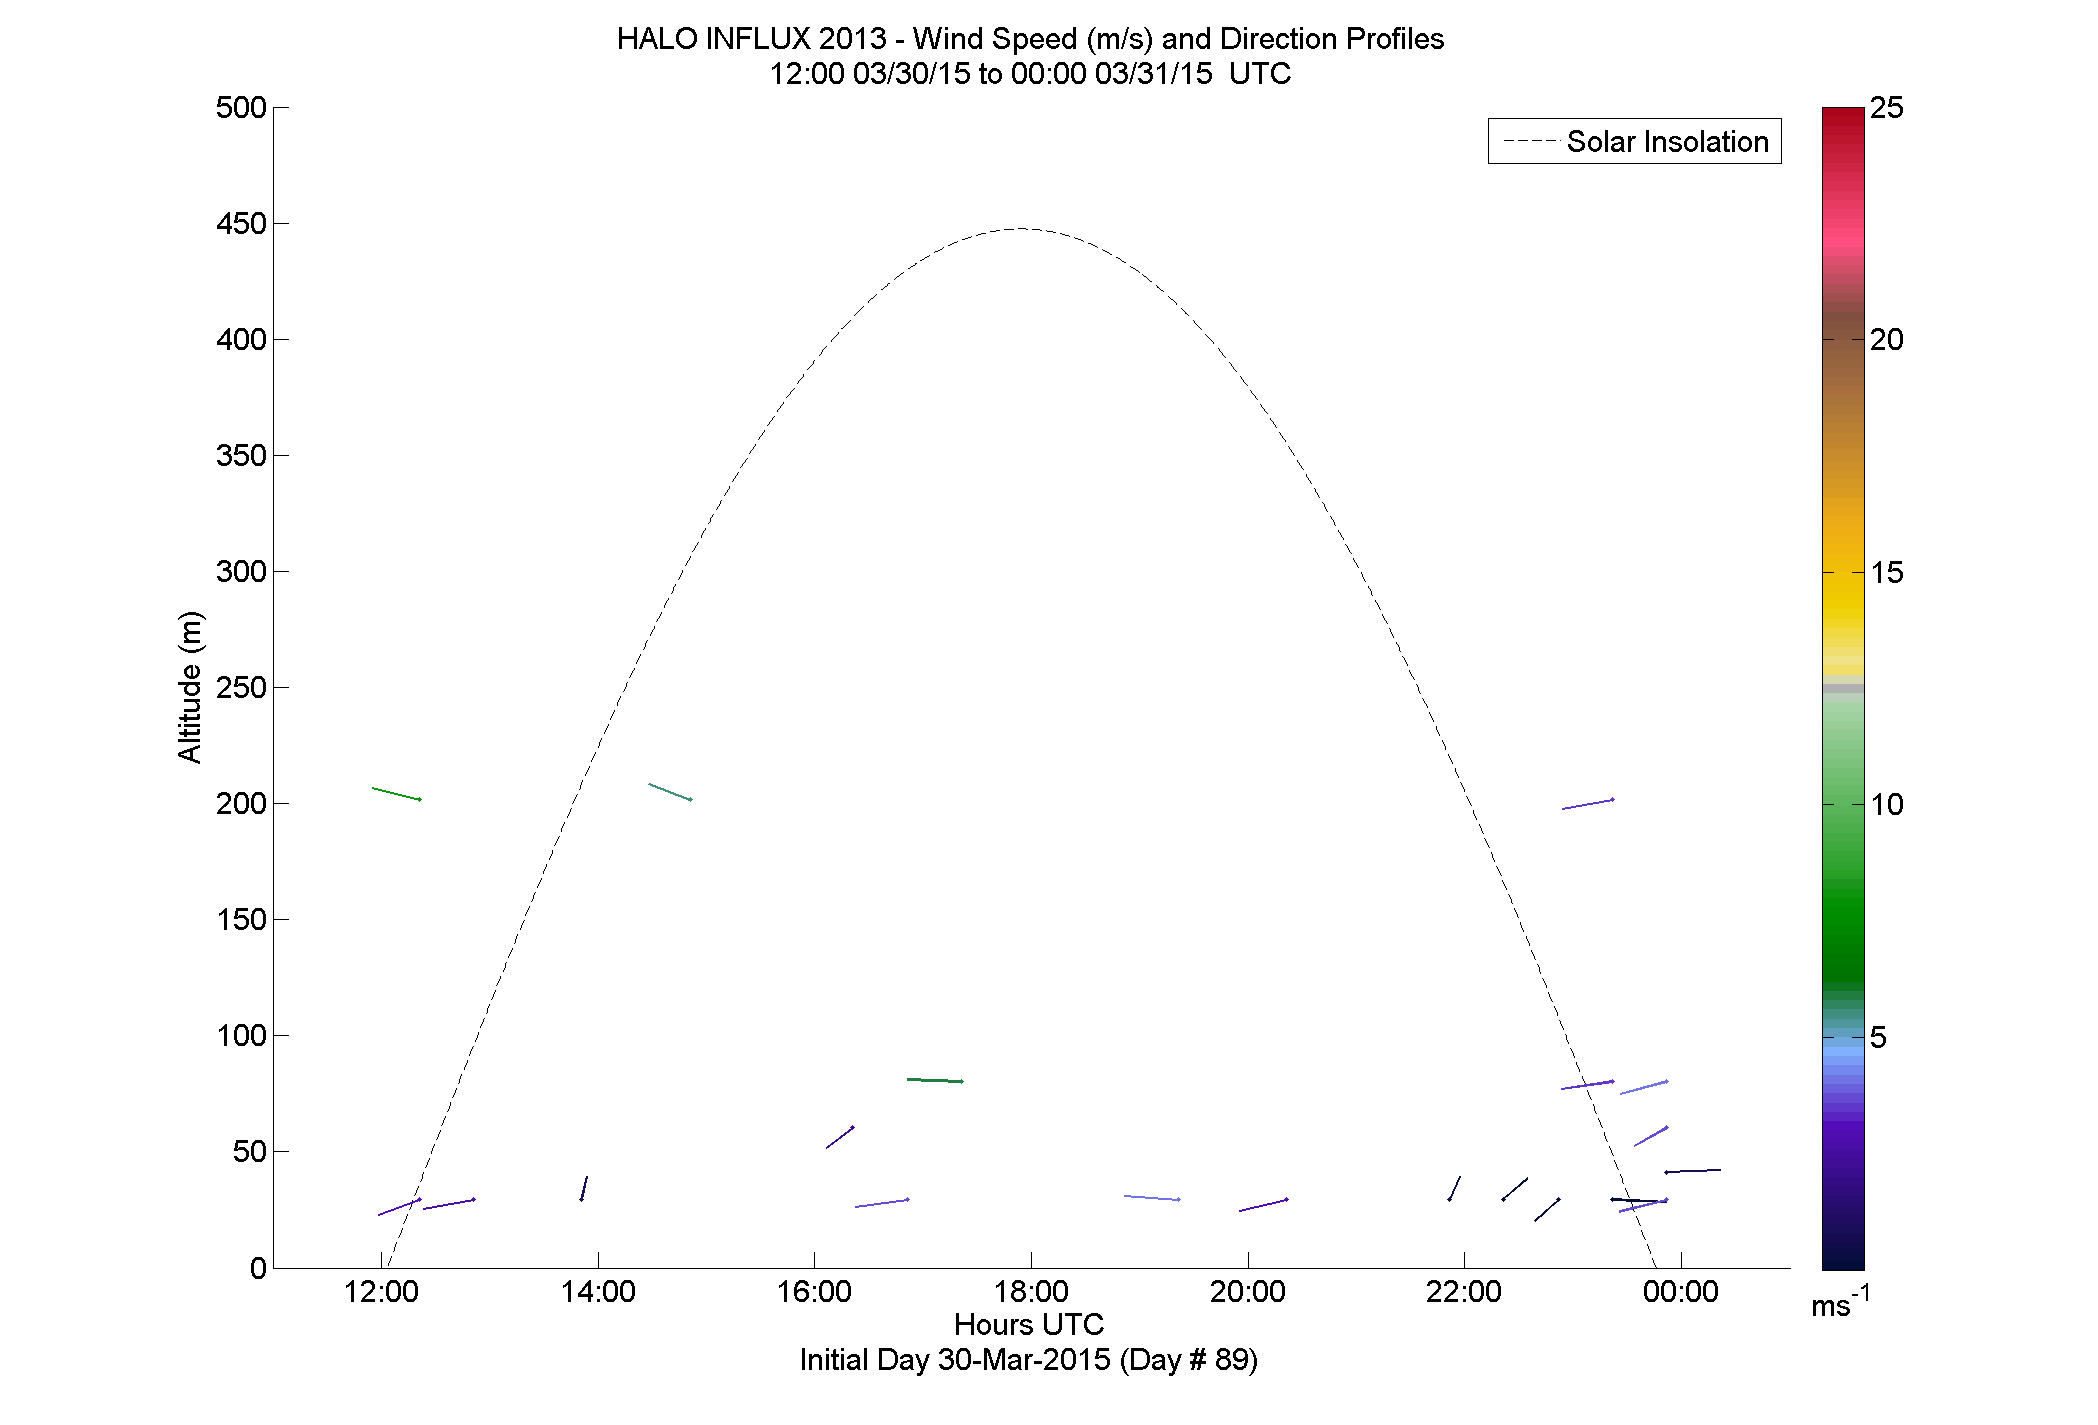 HALO speed and direction profile - March 30 pm